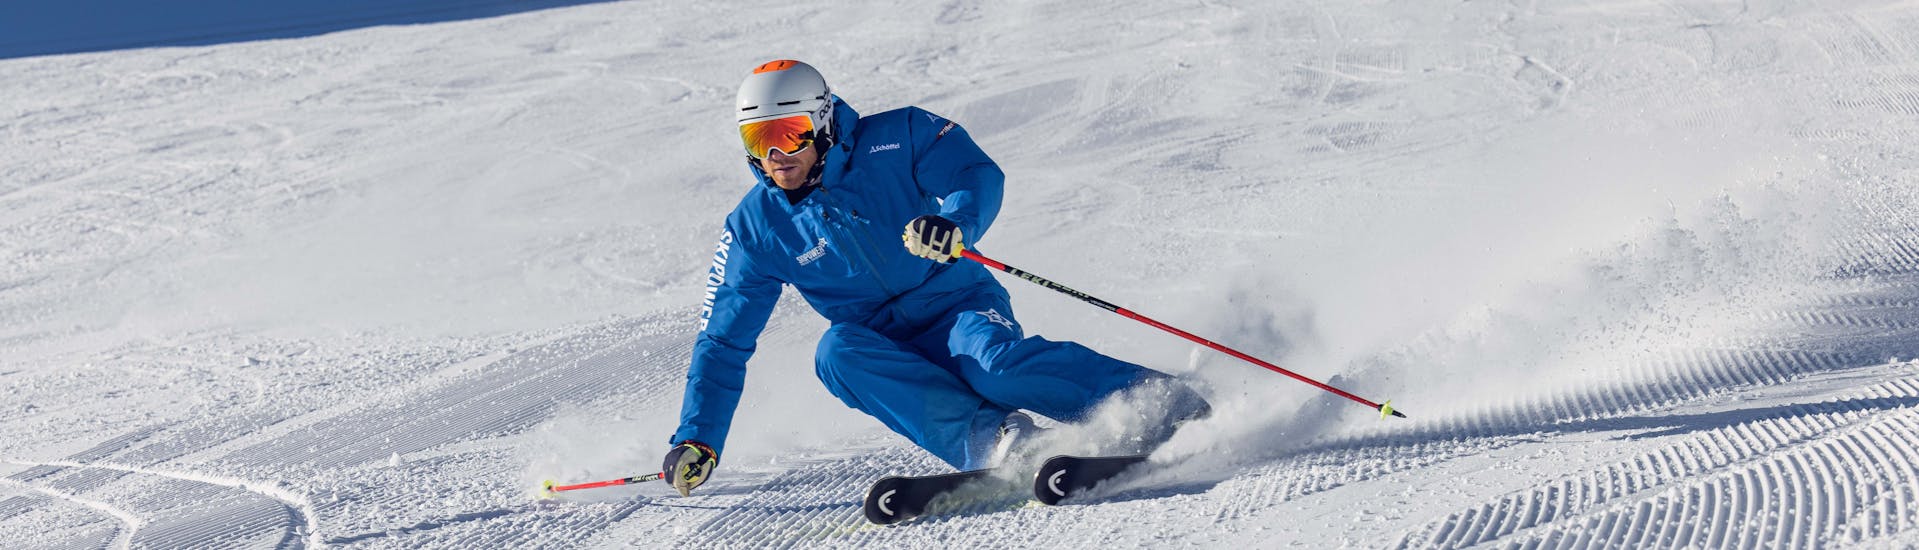 A skier from the Skipower Finkenberg ski school races down the slopes during his private ski lessons - Racing. 